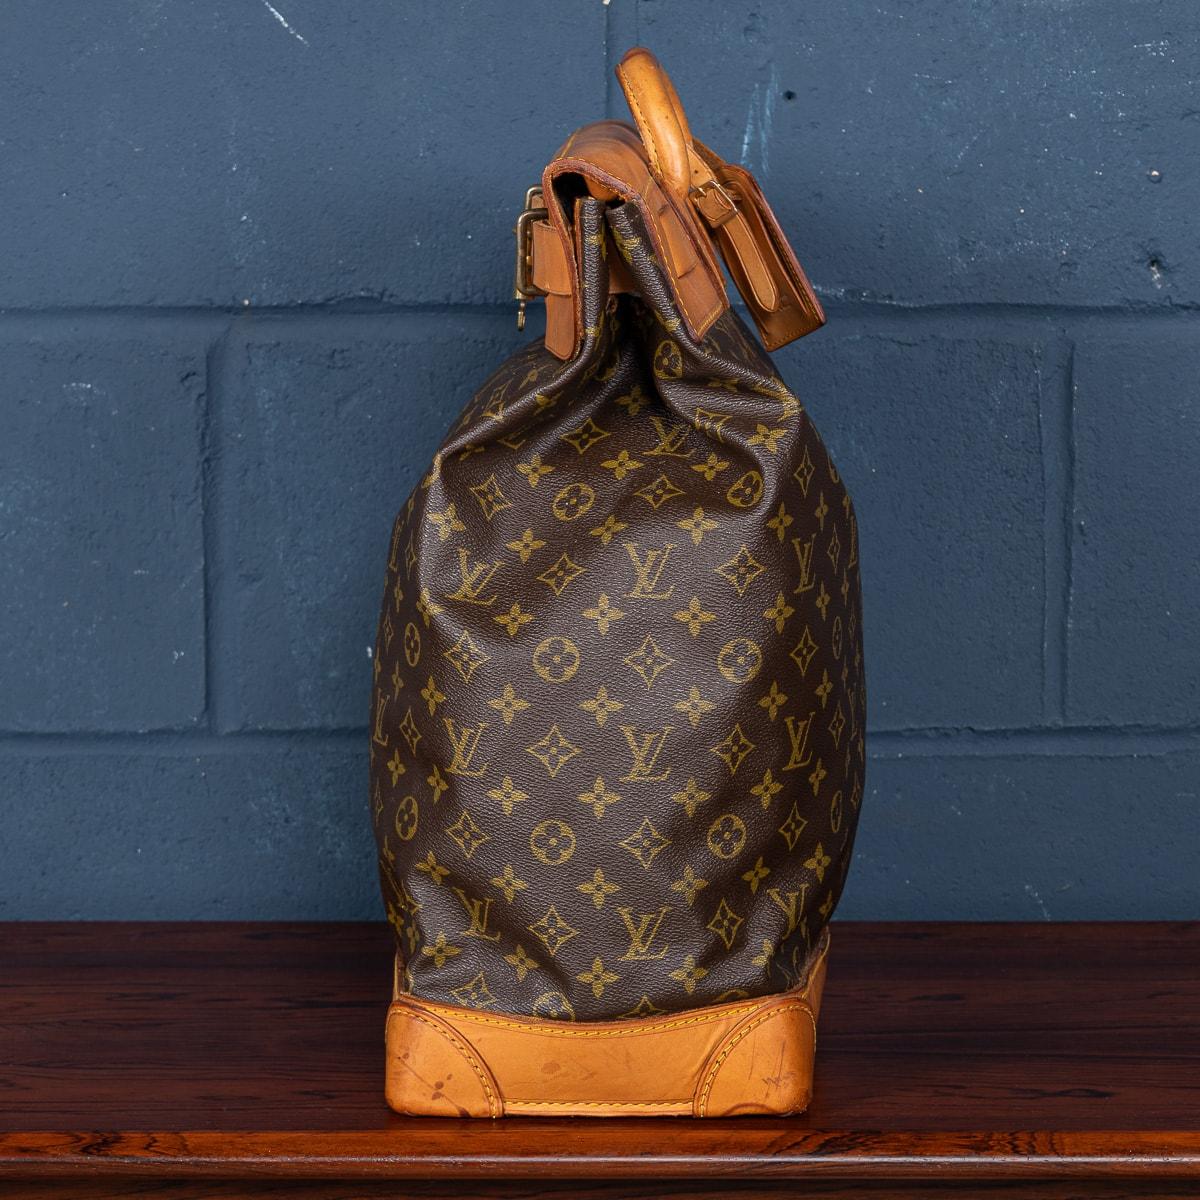 French 20th Century Louis Vuitton Steamer Bag In Monogram Canvas, Made In France